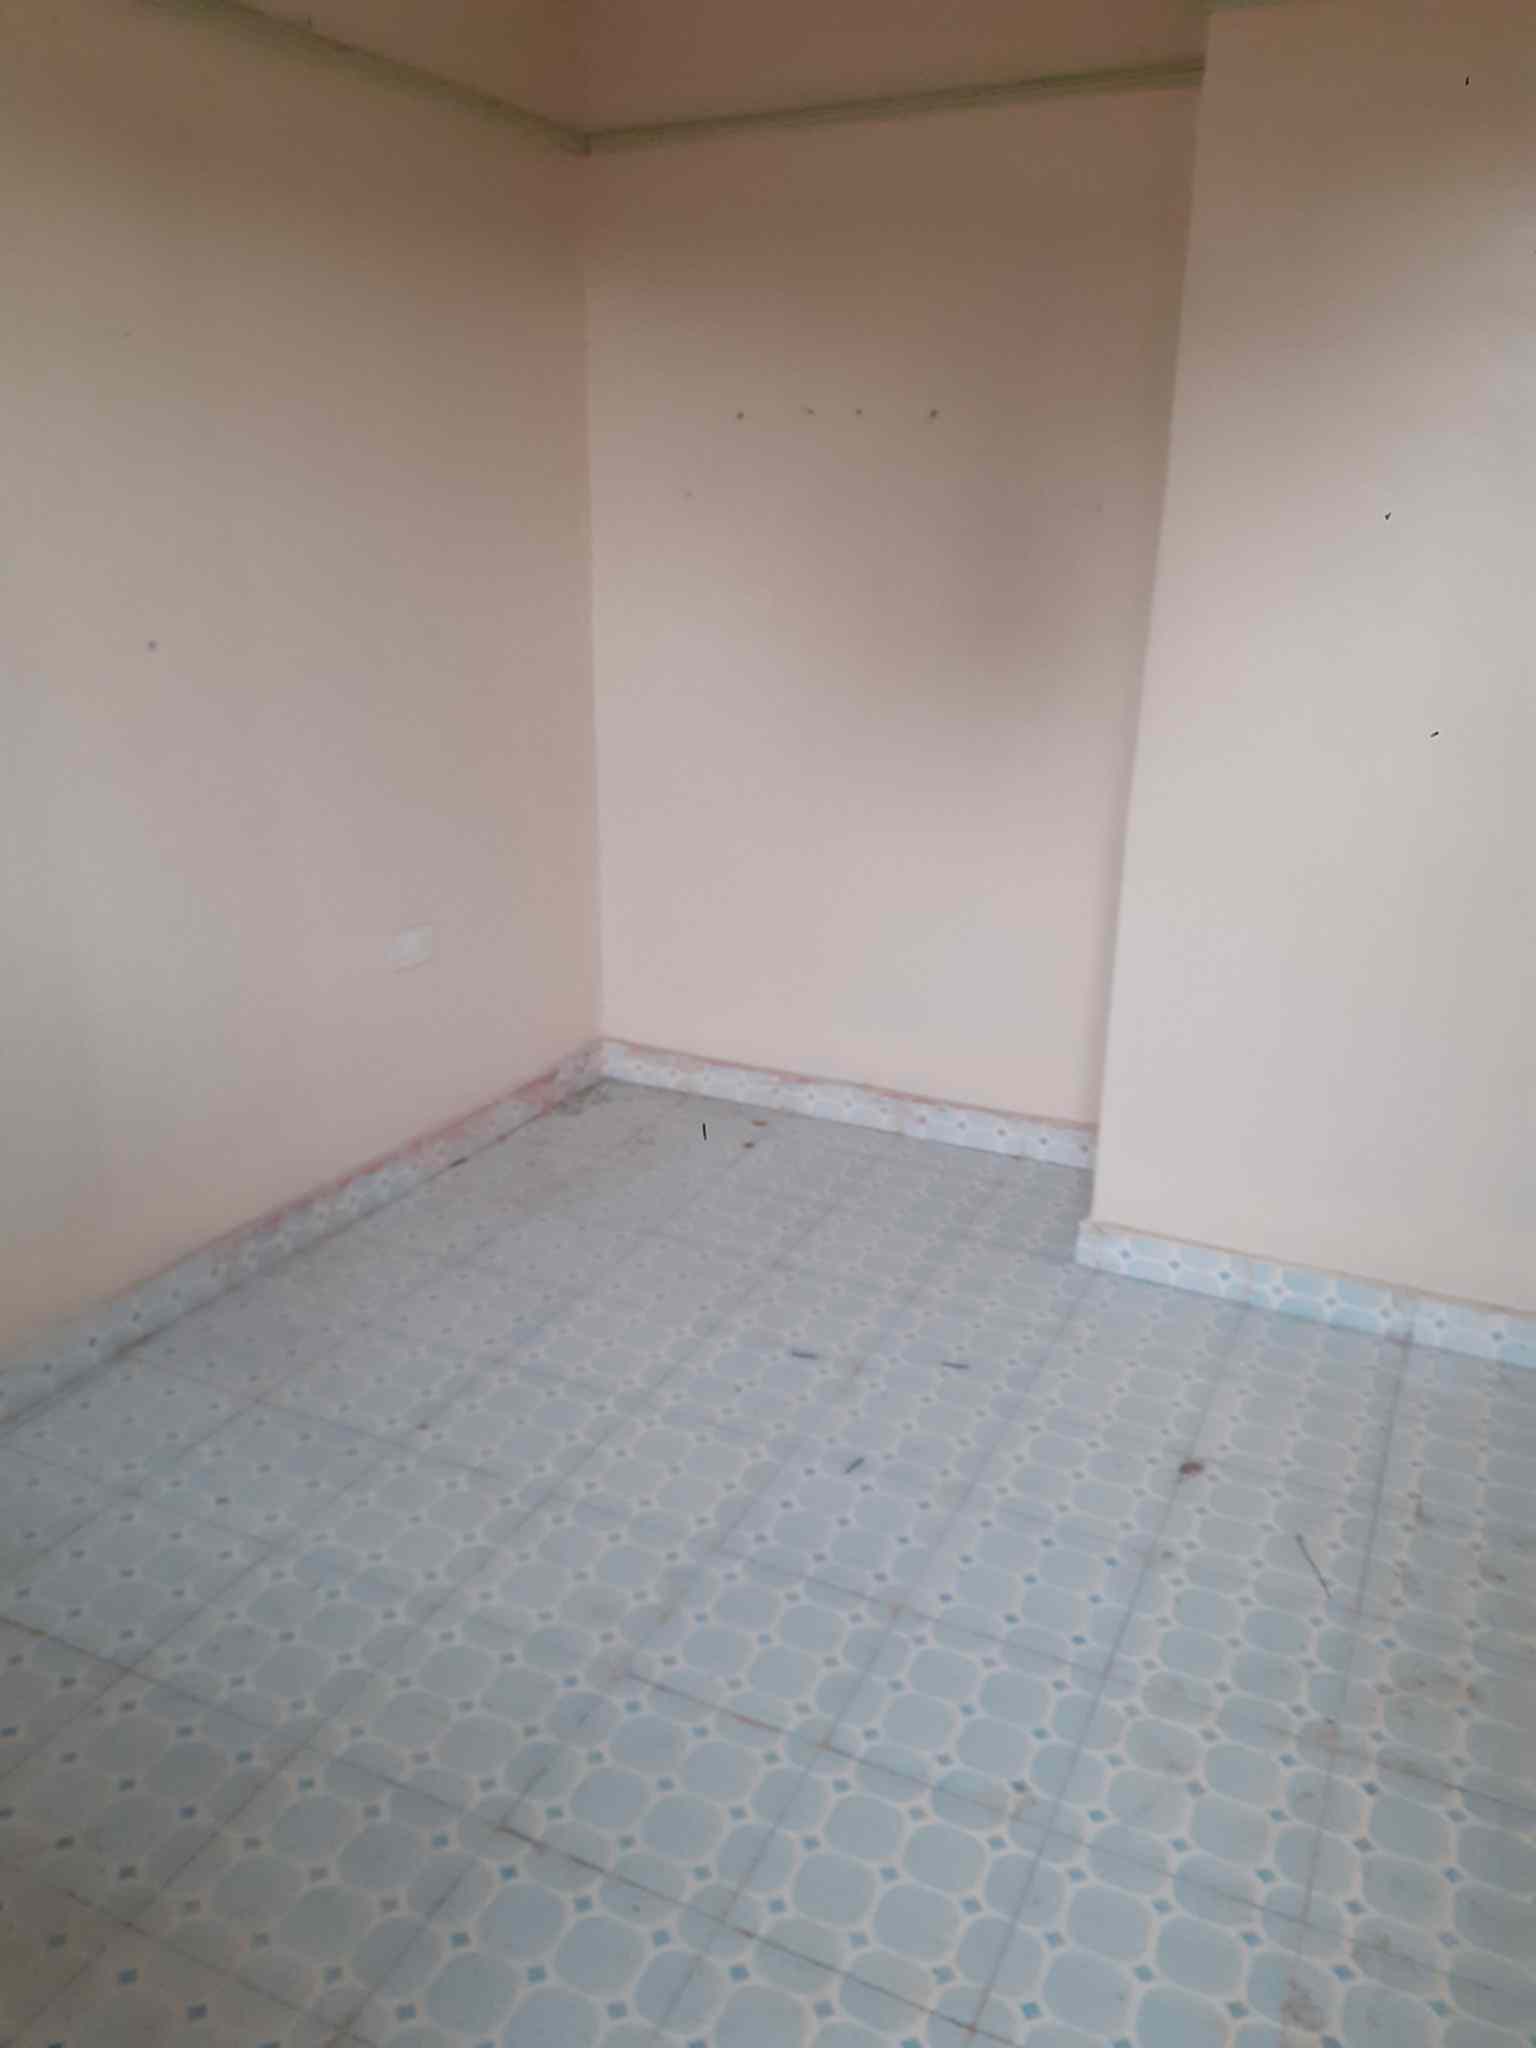 1 bedroom for rent along Ngong road